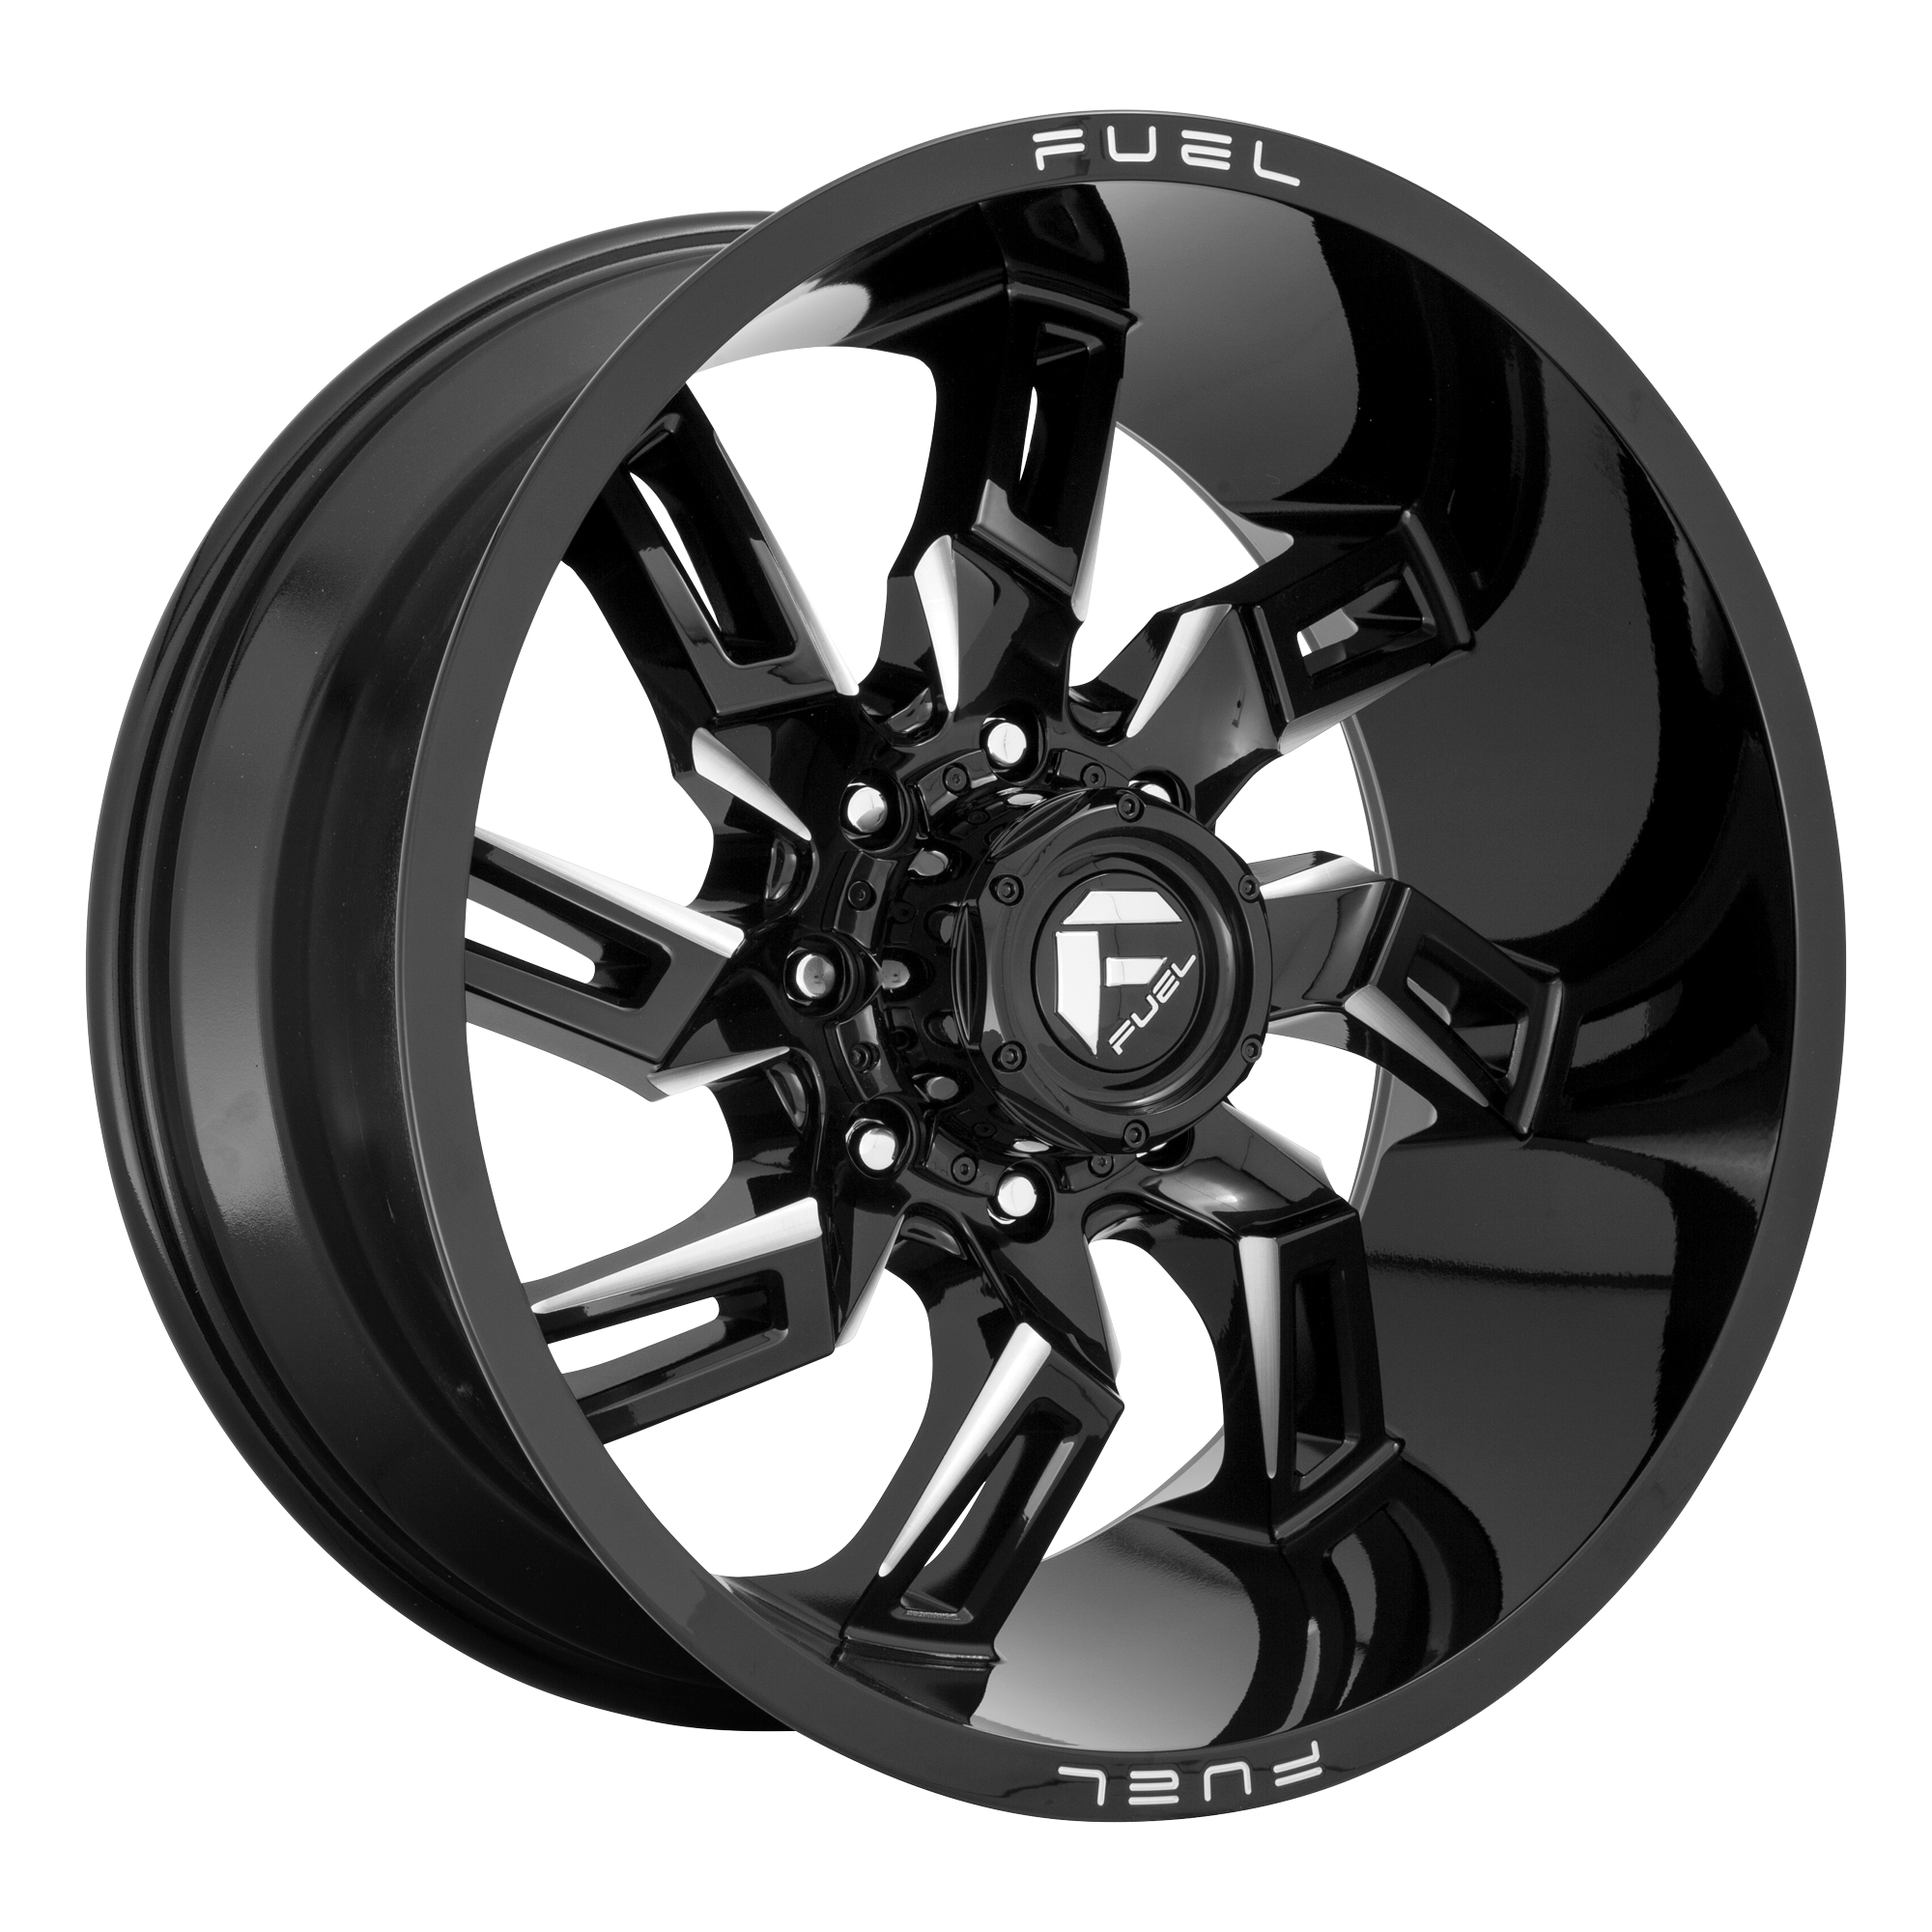 LOCKDOWN 20x9 8x170.00 GLOSS BLACK MILLED (1 mm) - Tires and Engine Performance